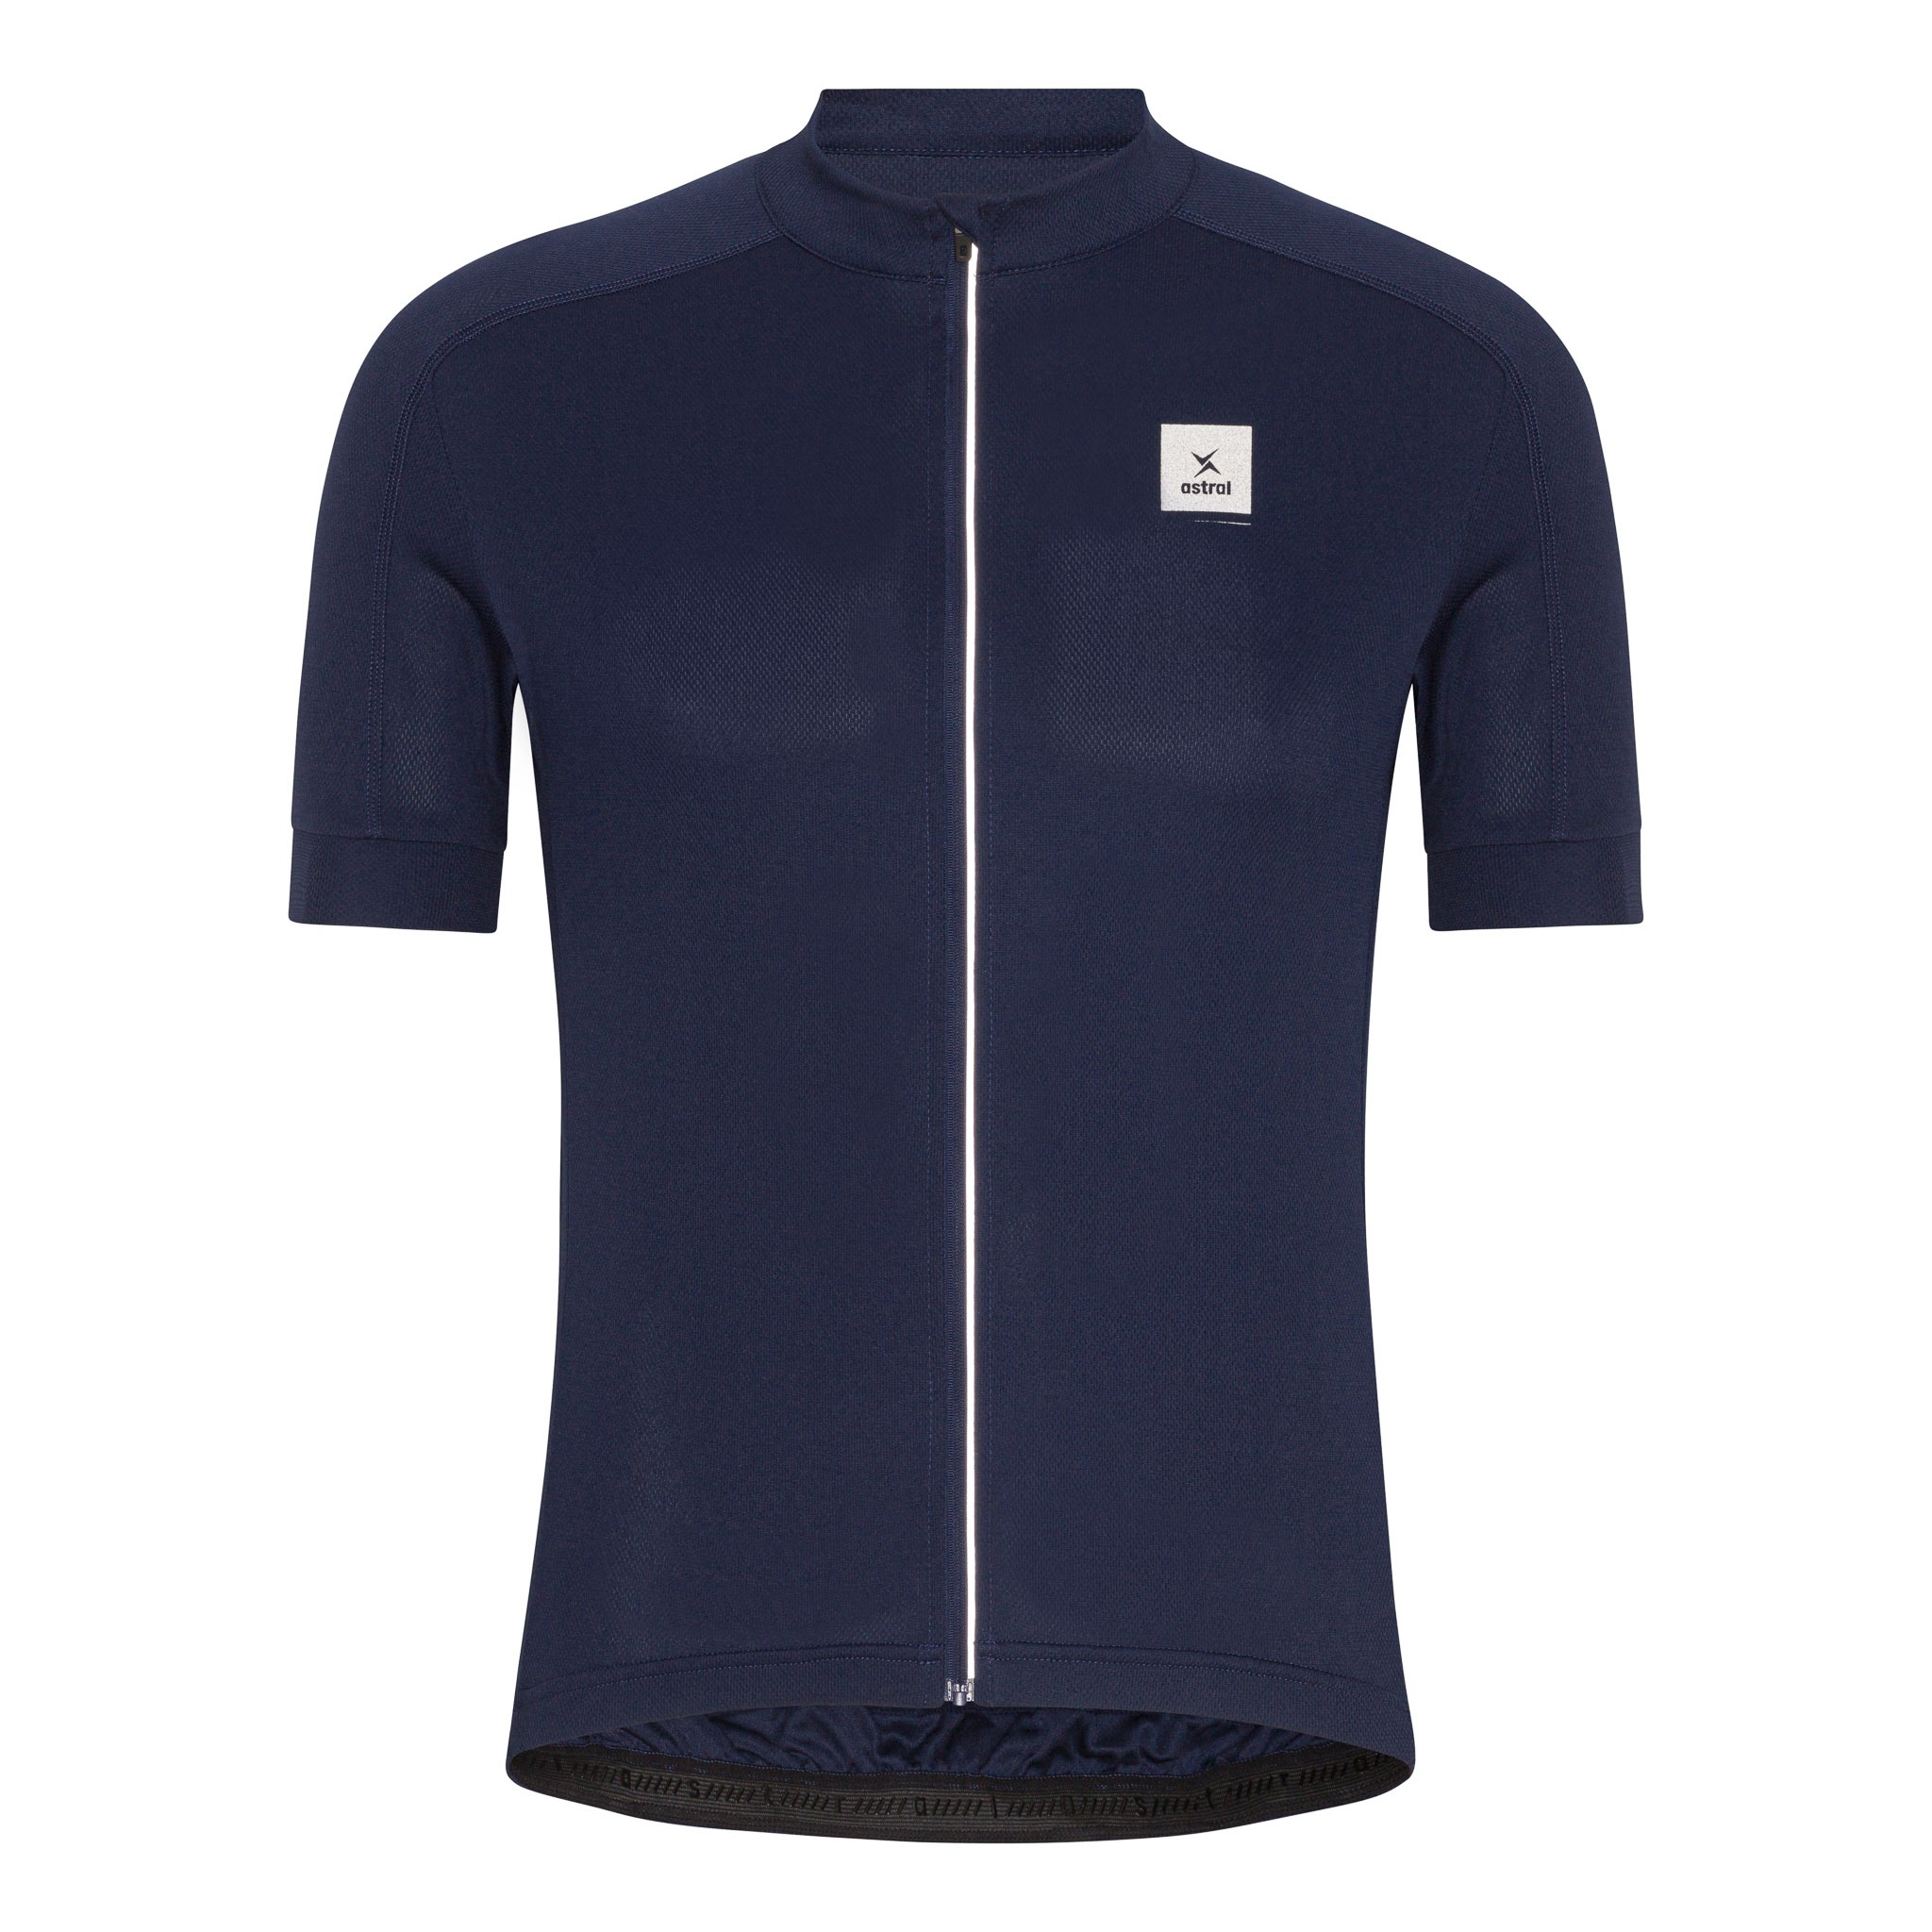 Astral Cykeltrøje Navy Campione Cycling